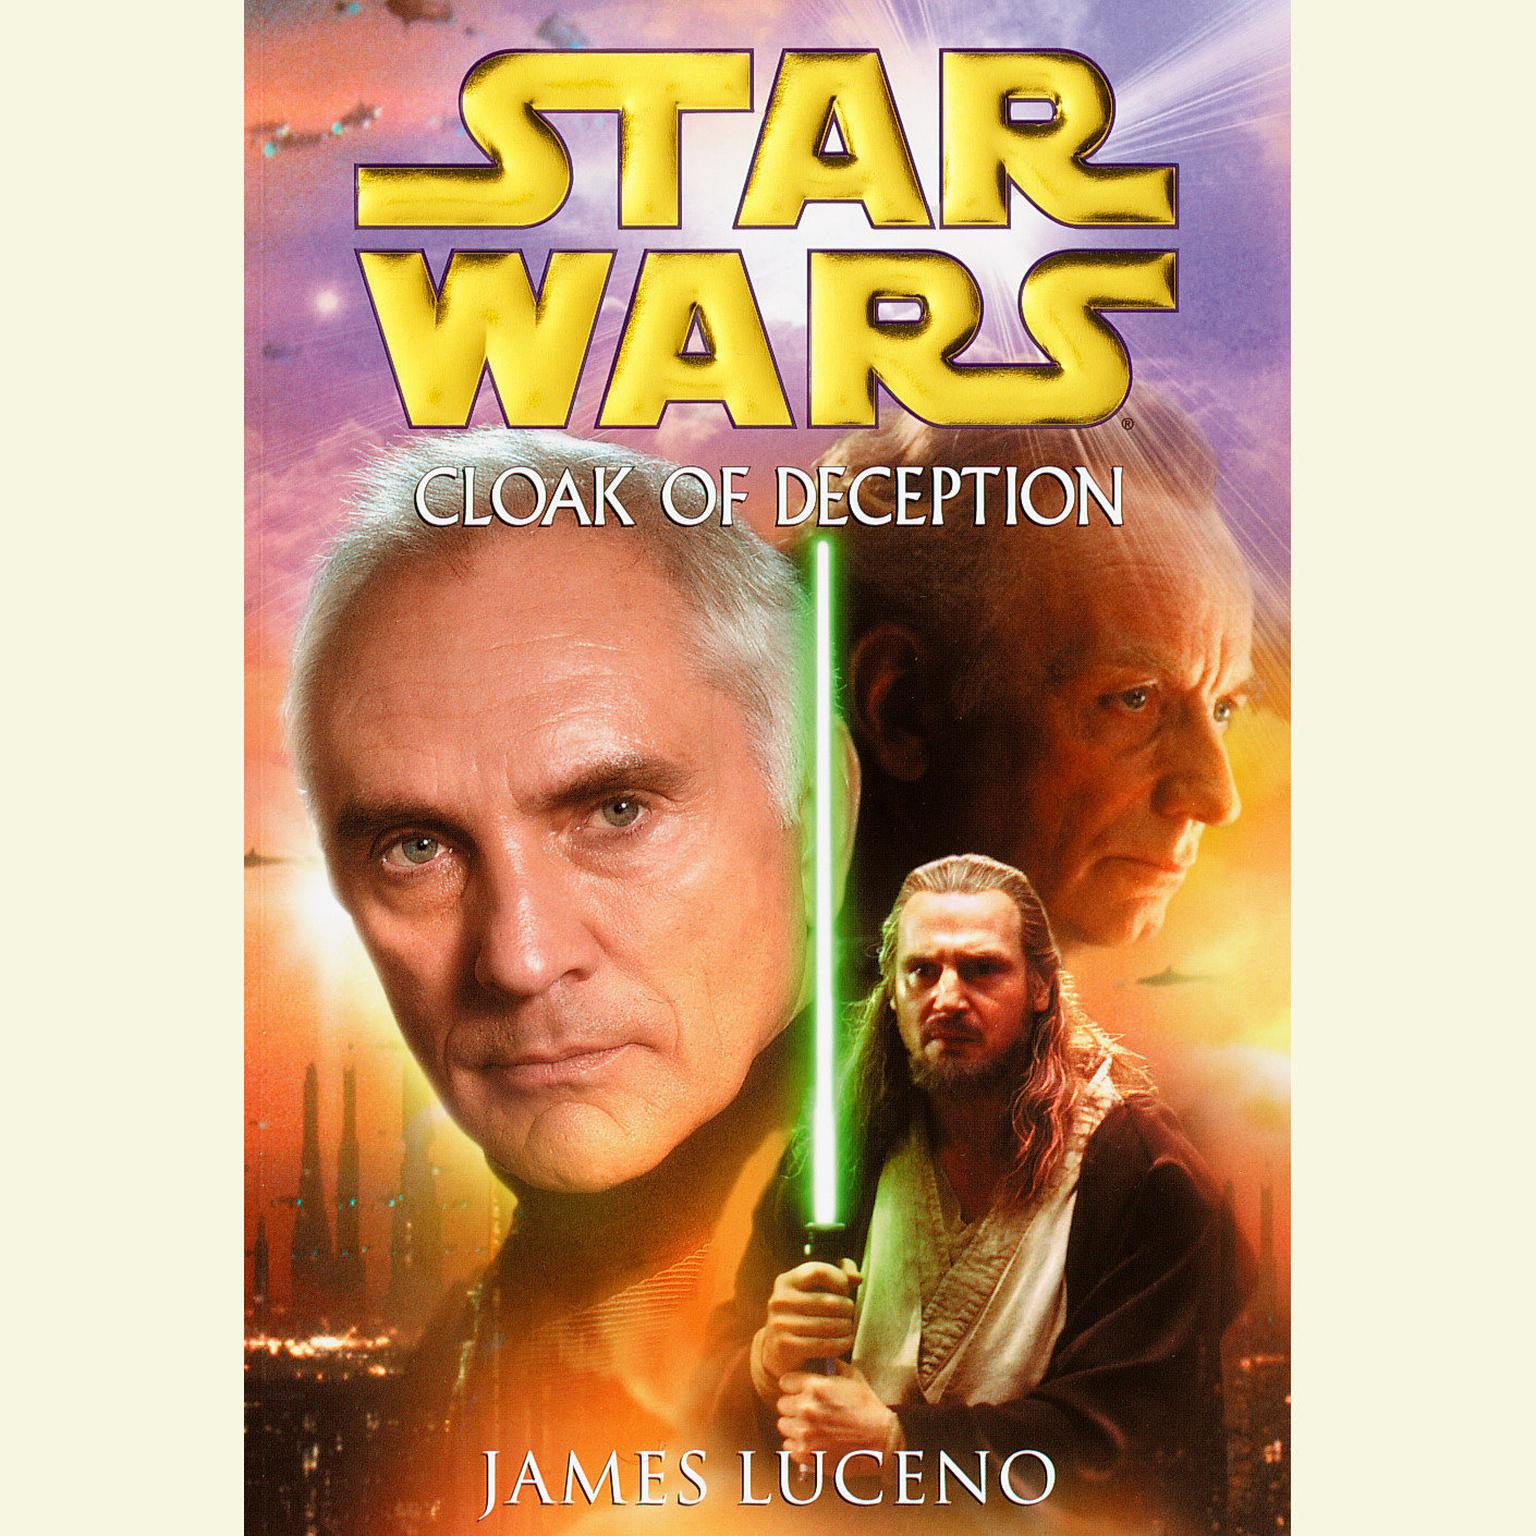 Star Wars: Cloak of Deception (Abridged) Audiobook, by James Luceno